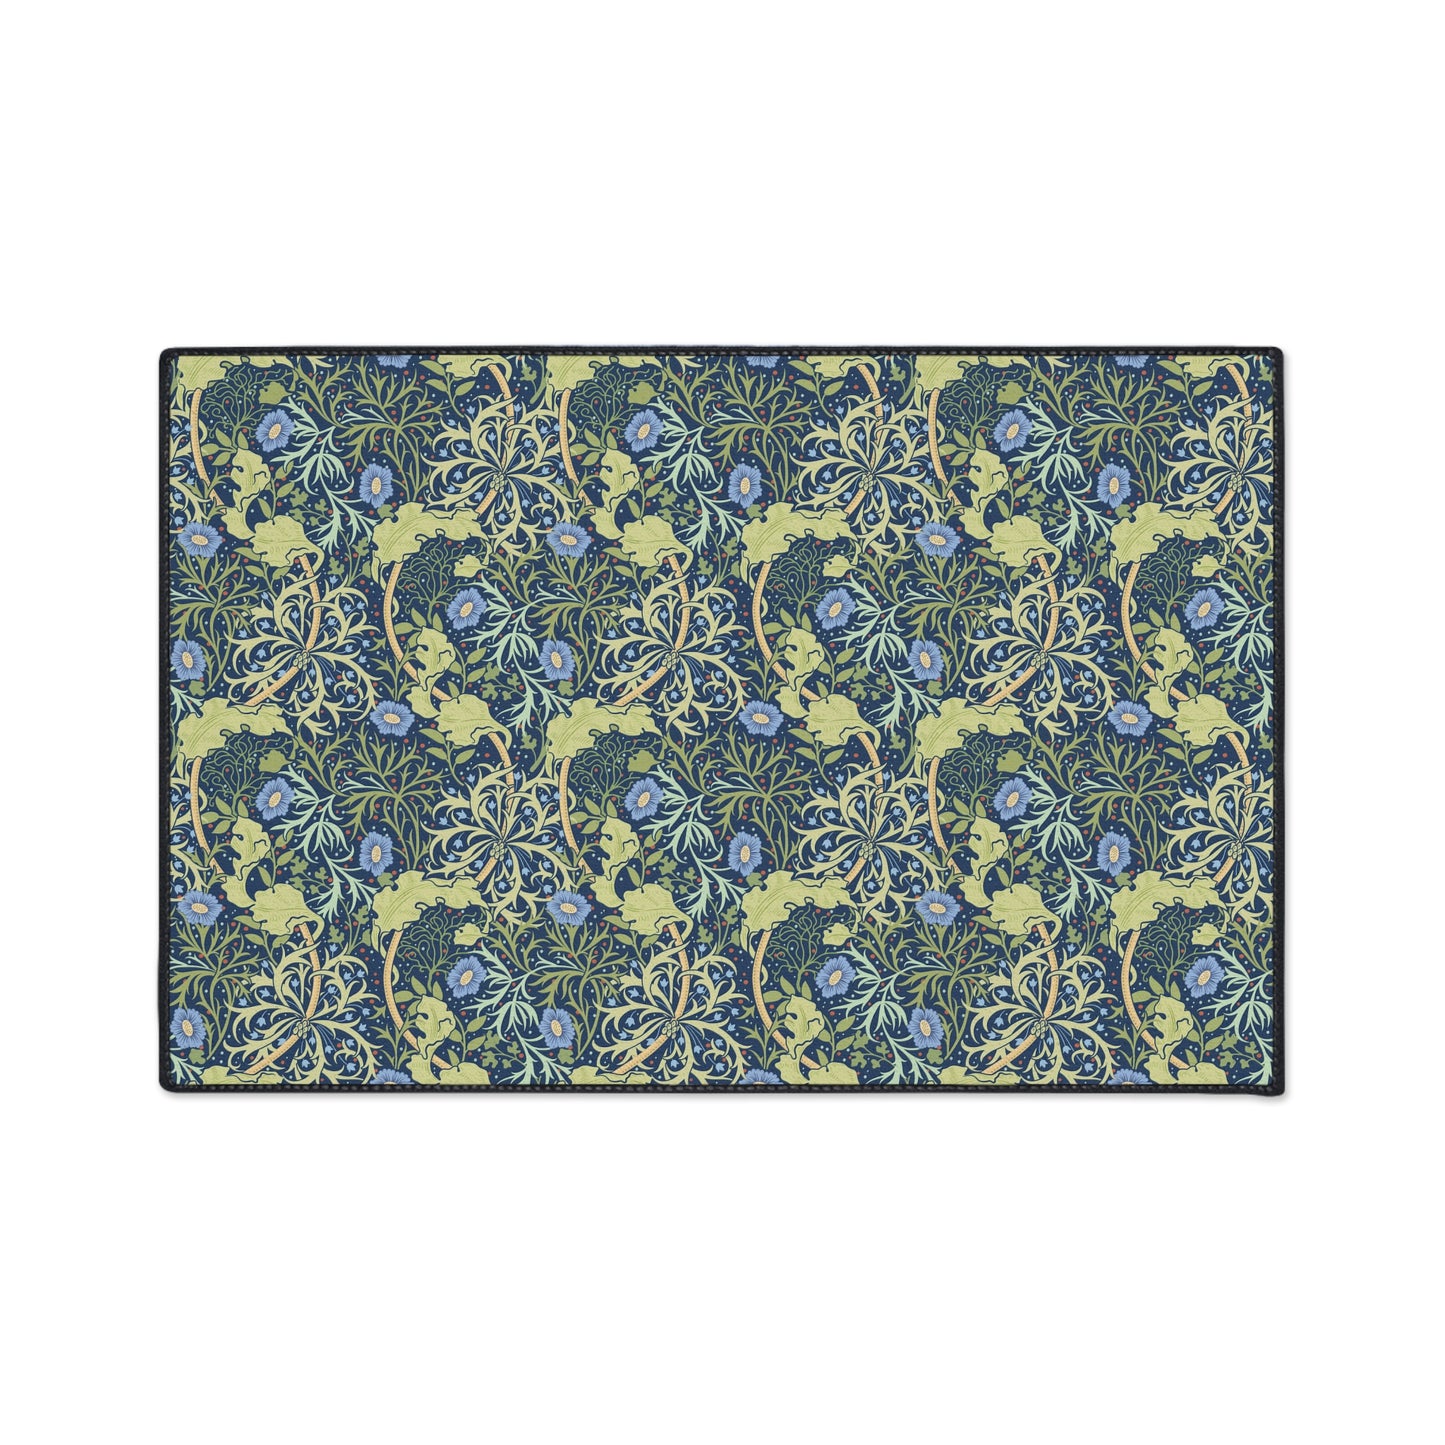 william-morris-co-heavy-duty-floor-mat-seaweed-collection-blue-flowers-3